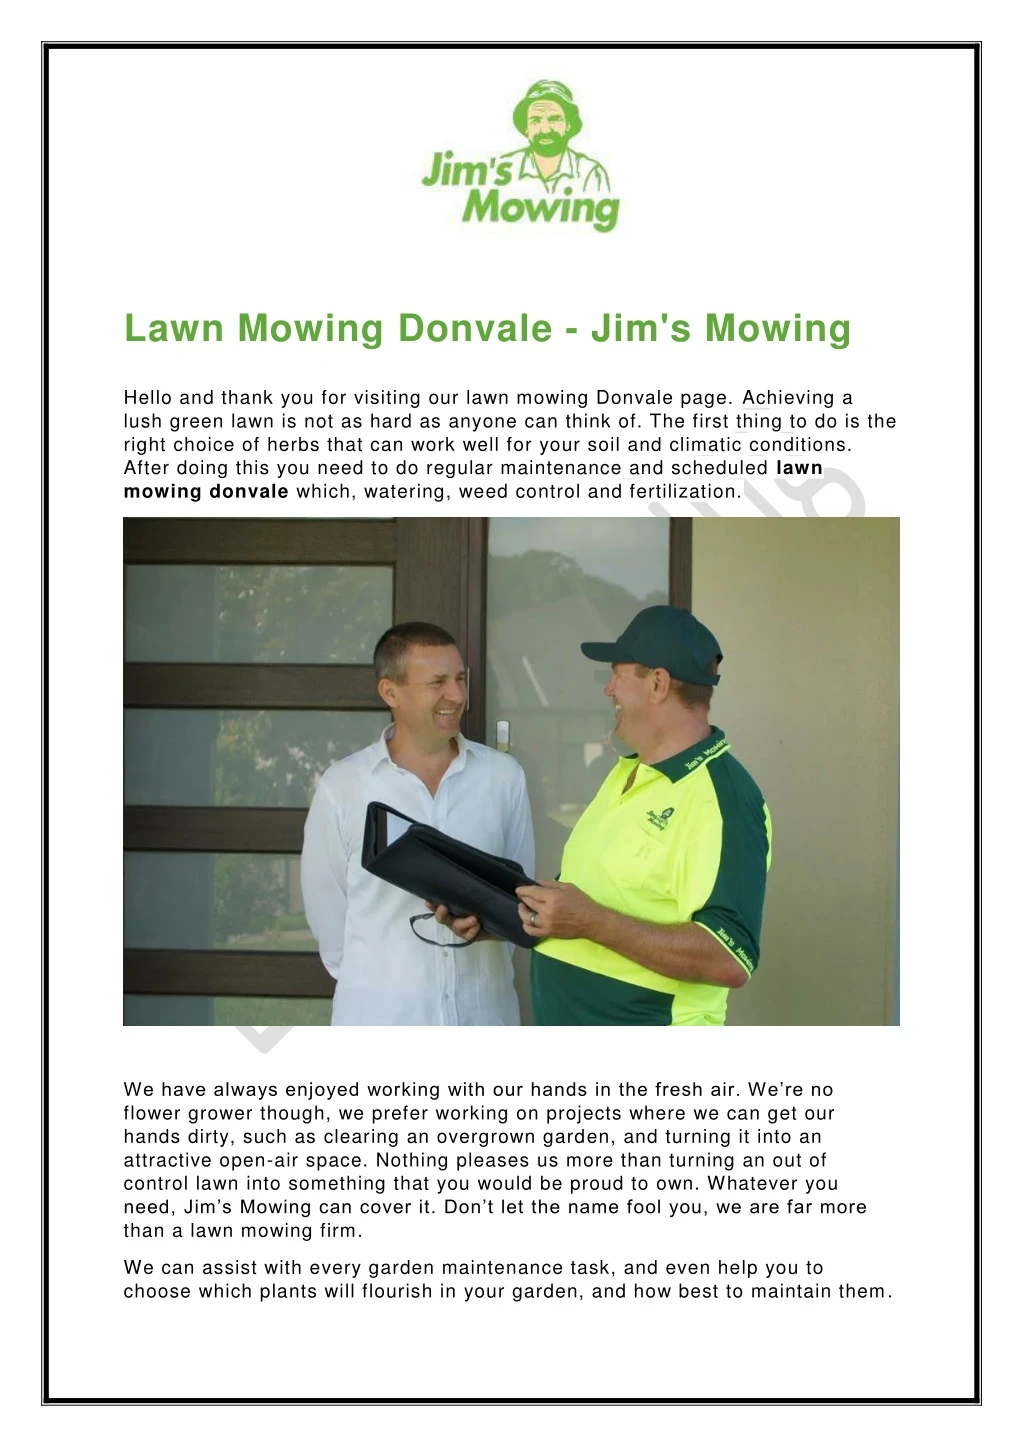 lawn mowing donvale jim s mowing n.